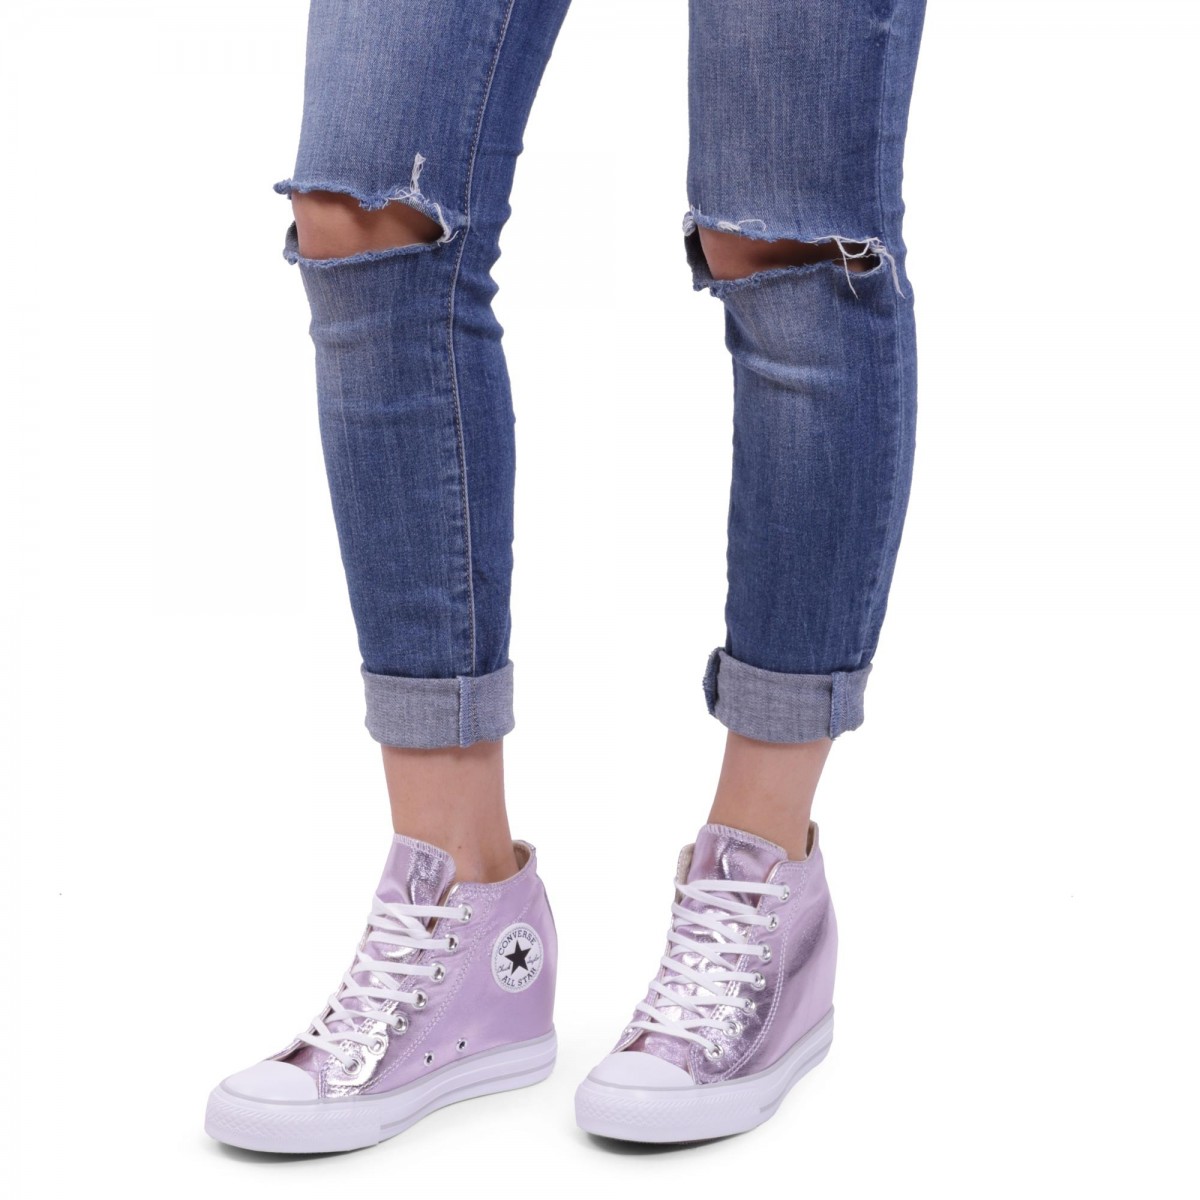 CHUCK TAYLOR LUX MID 556779C